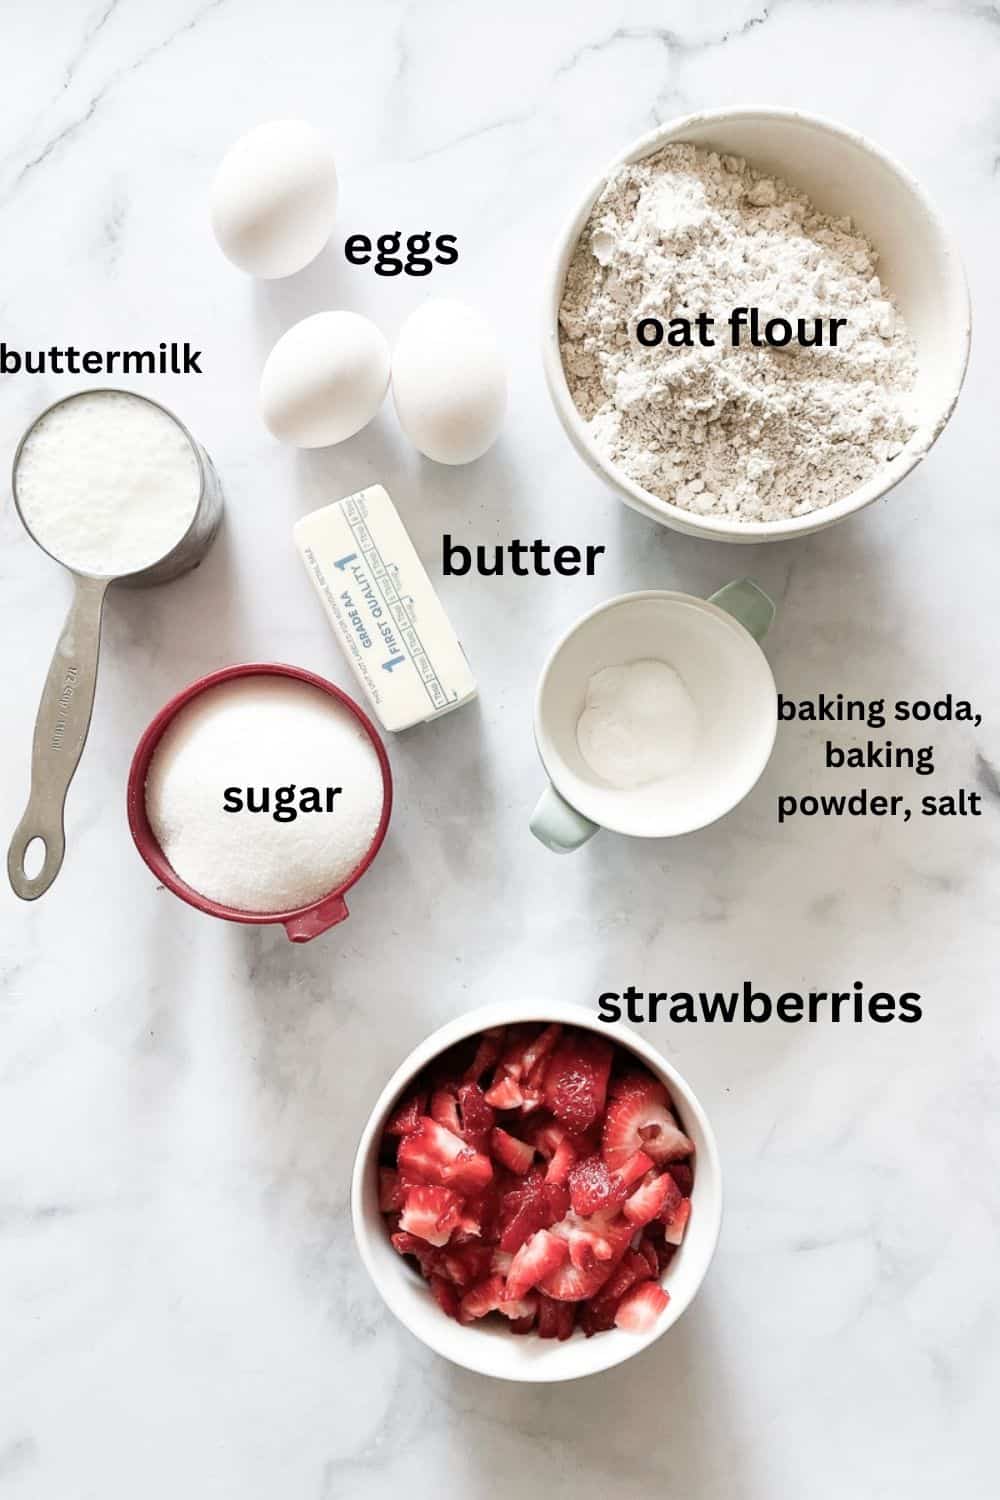 Ingredients for gluten free strawberry buttermilk cake are labeled and portioned: oat flour, baking powder, baking soda, salt, buttermilk, eggs, sugar, strawberries, butter.